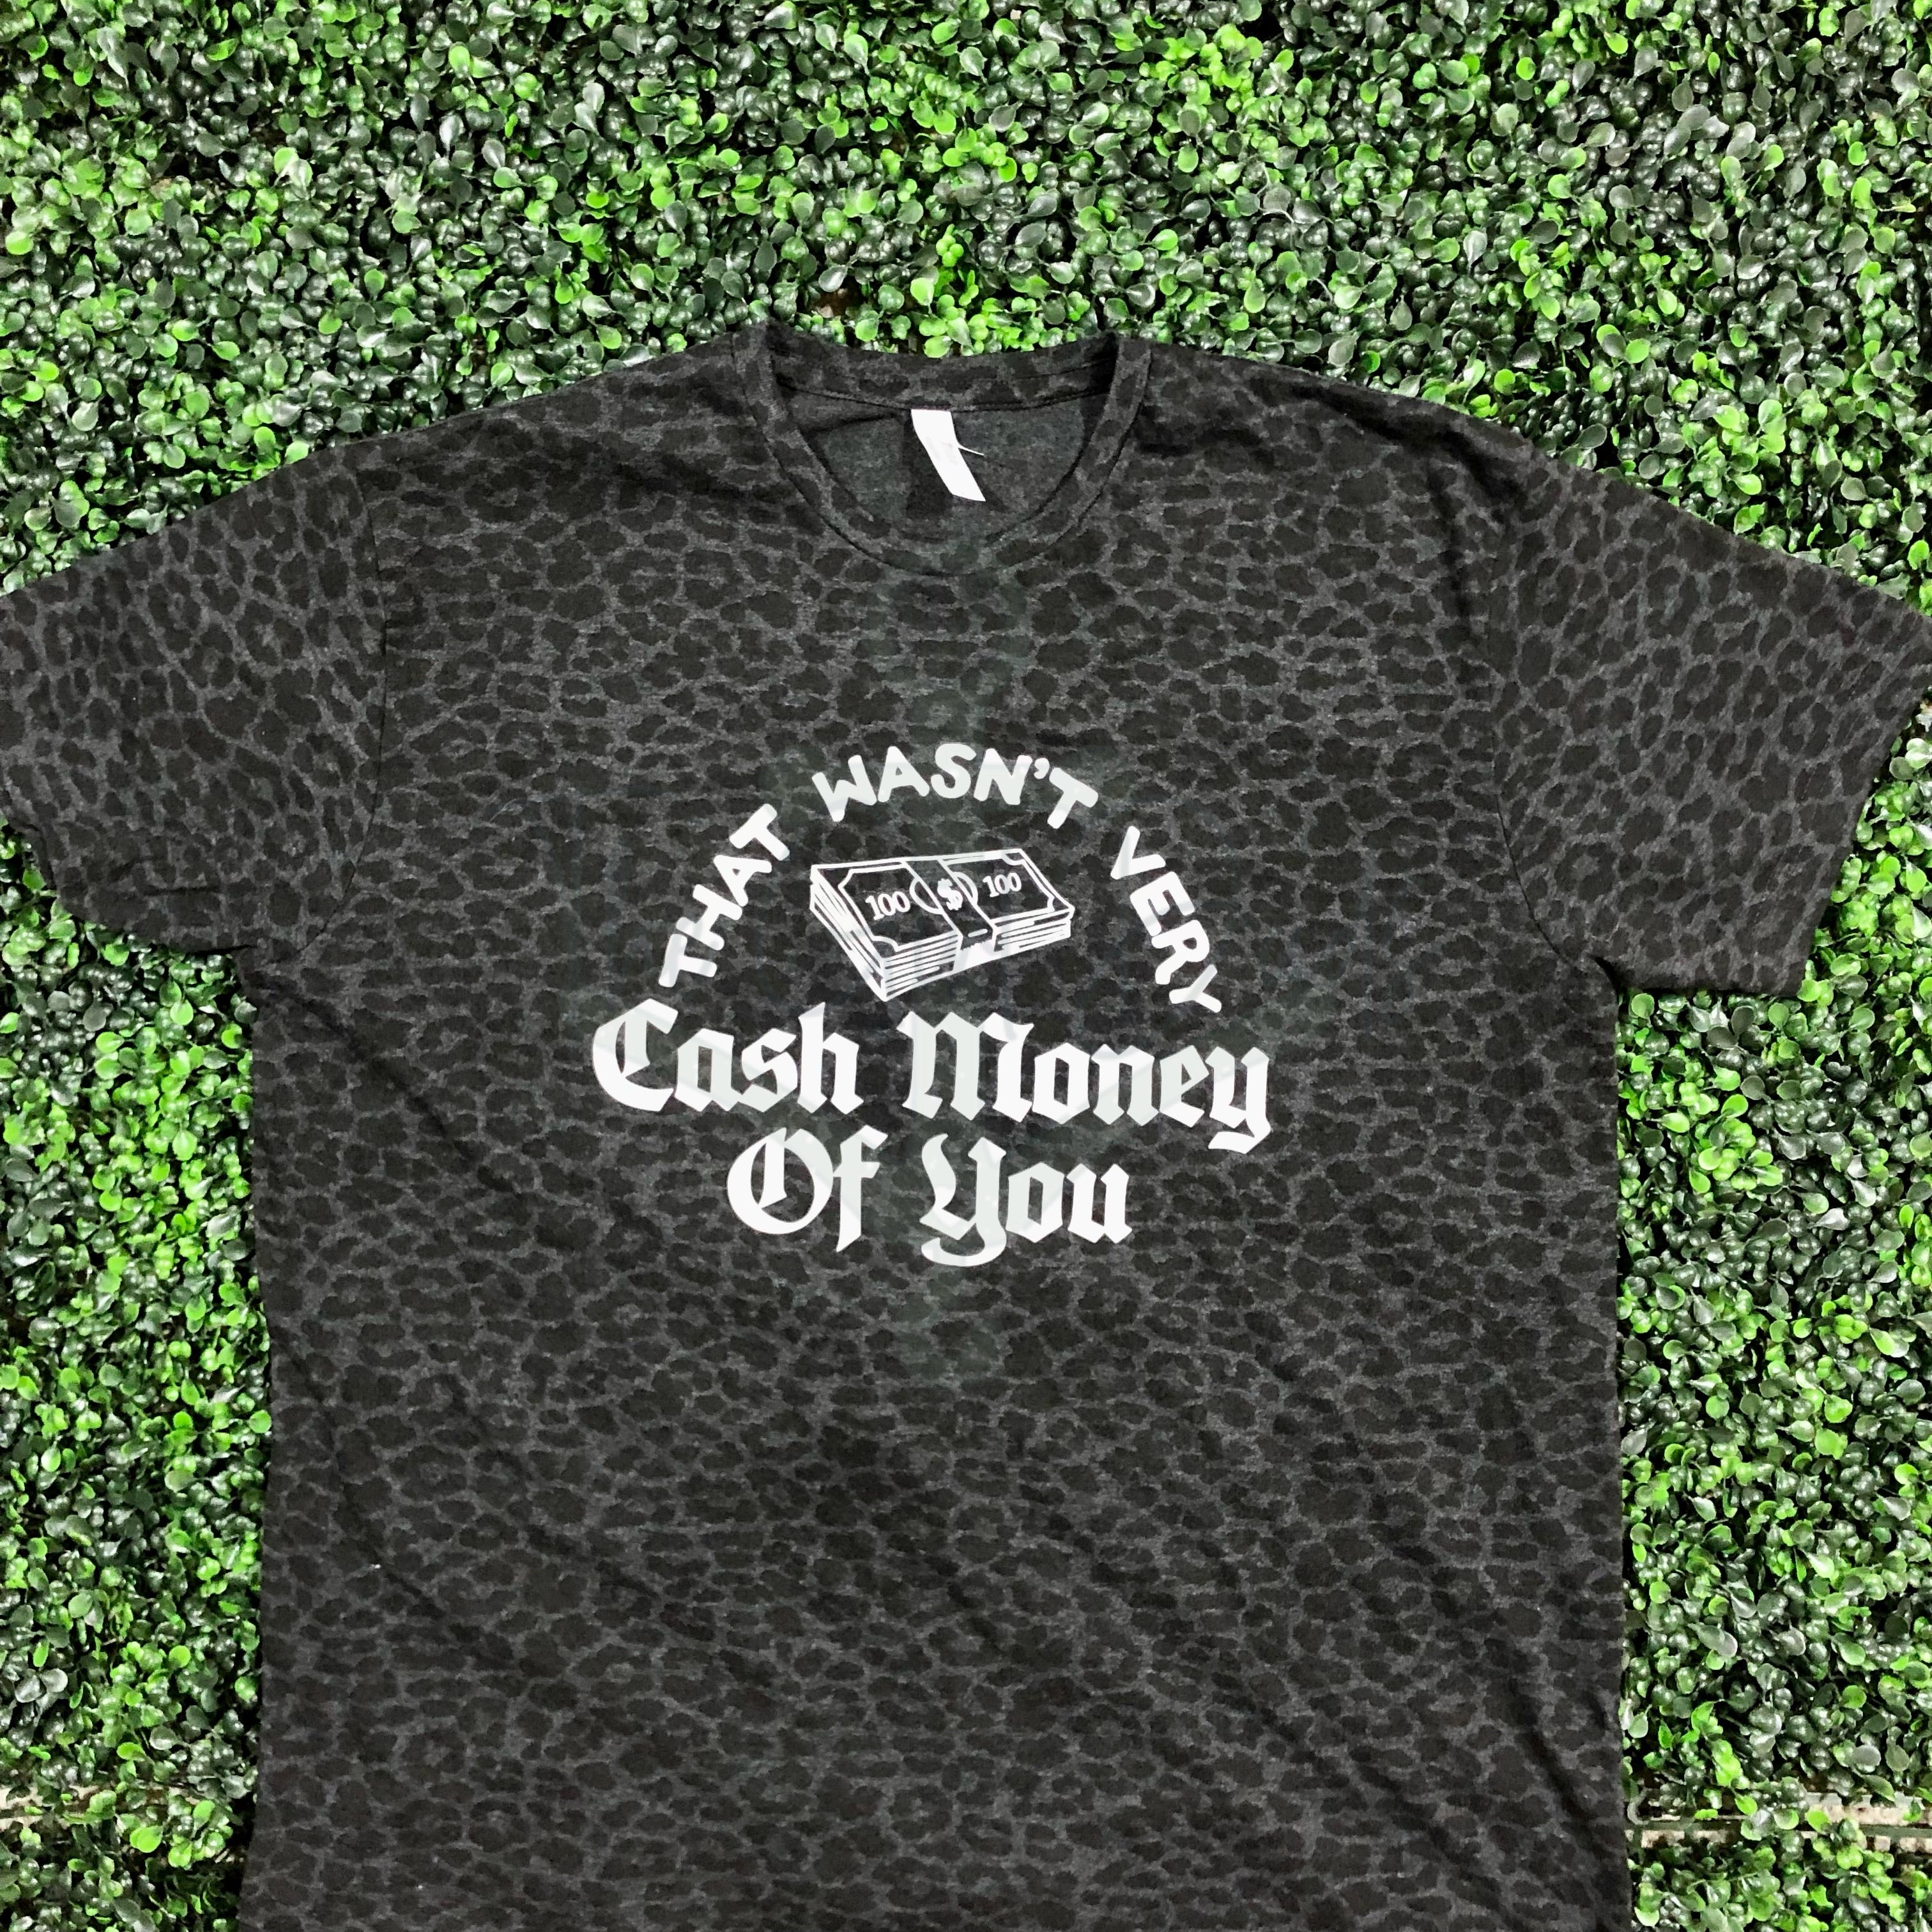 That Wasn't Very Cash Money Of You Screen Print Top Design